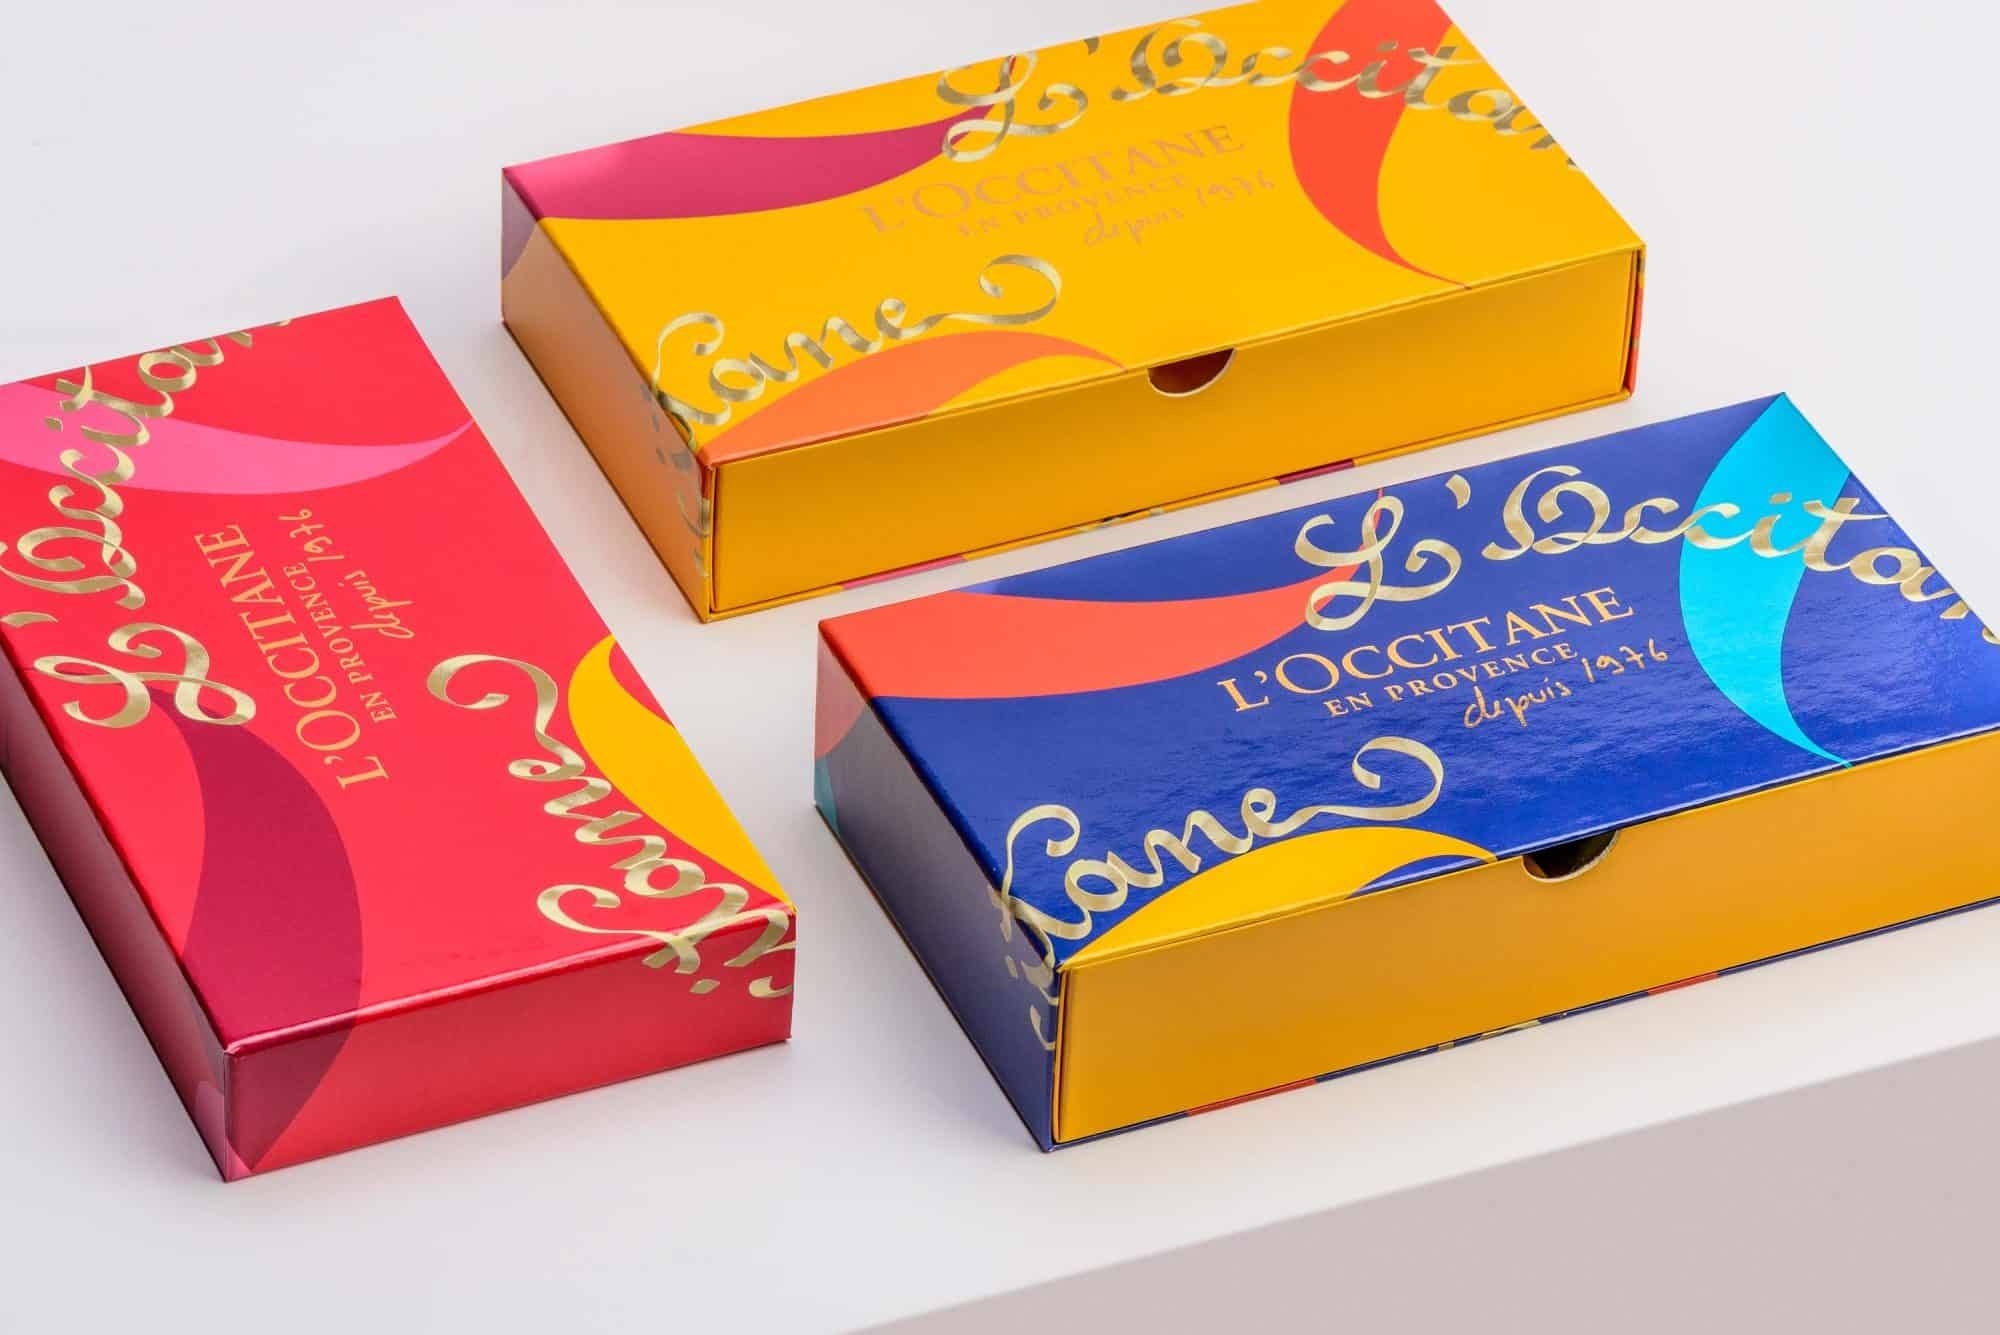 Image of bespoke L'Occitane folding gift box and carton packaging for ecommerce products.